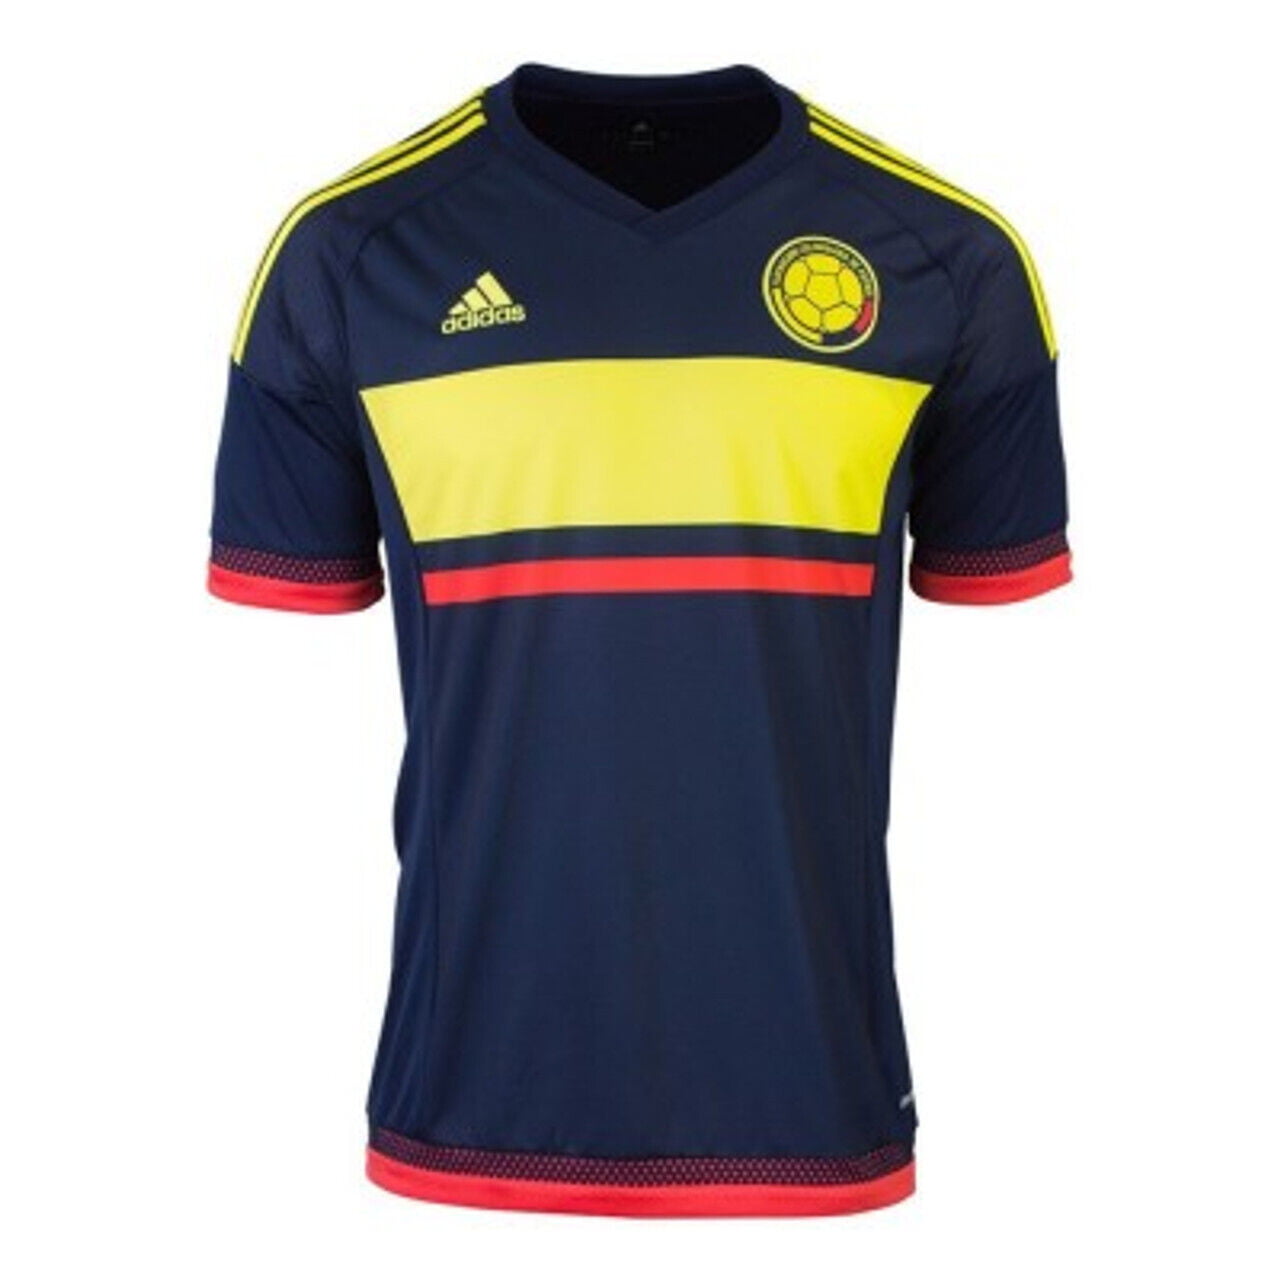 Adidas Climacool Youth Colombia International Soccer Jersey, Blue, - Walmart.com